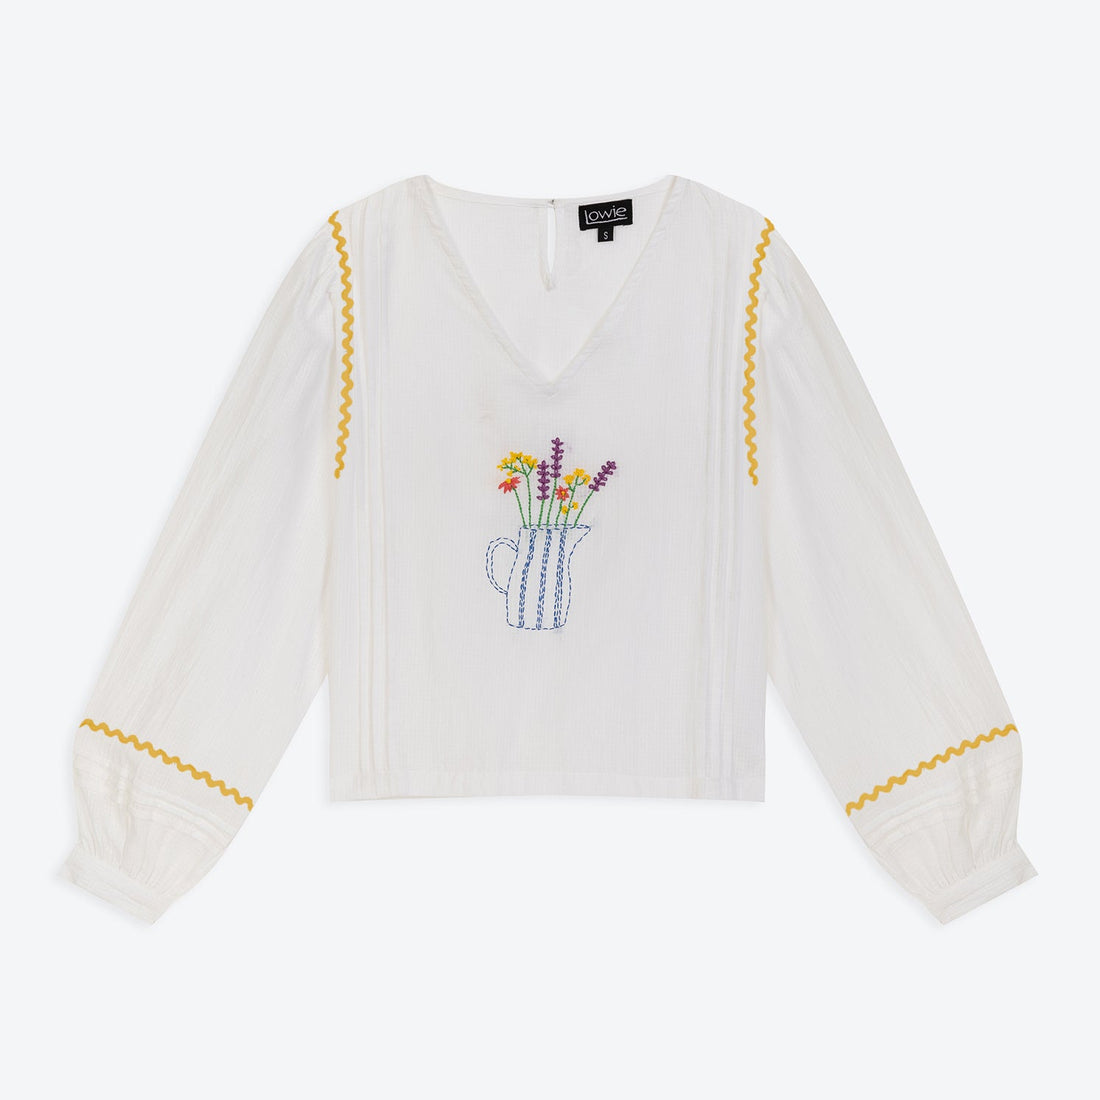 Lowie White Embroidered Vase Blouse